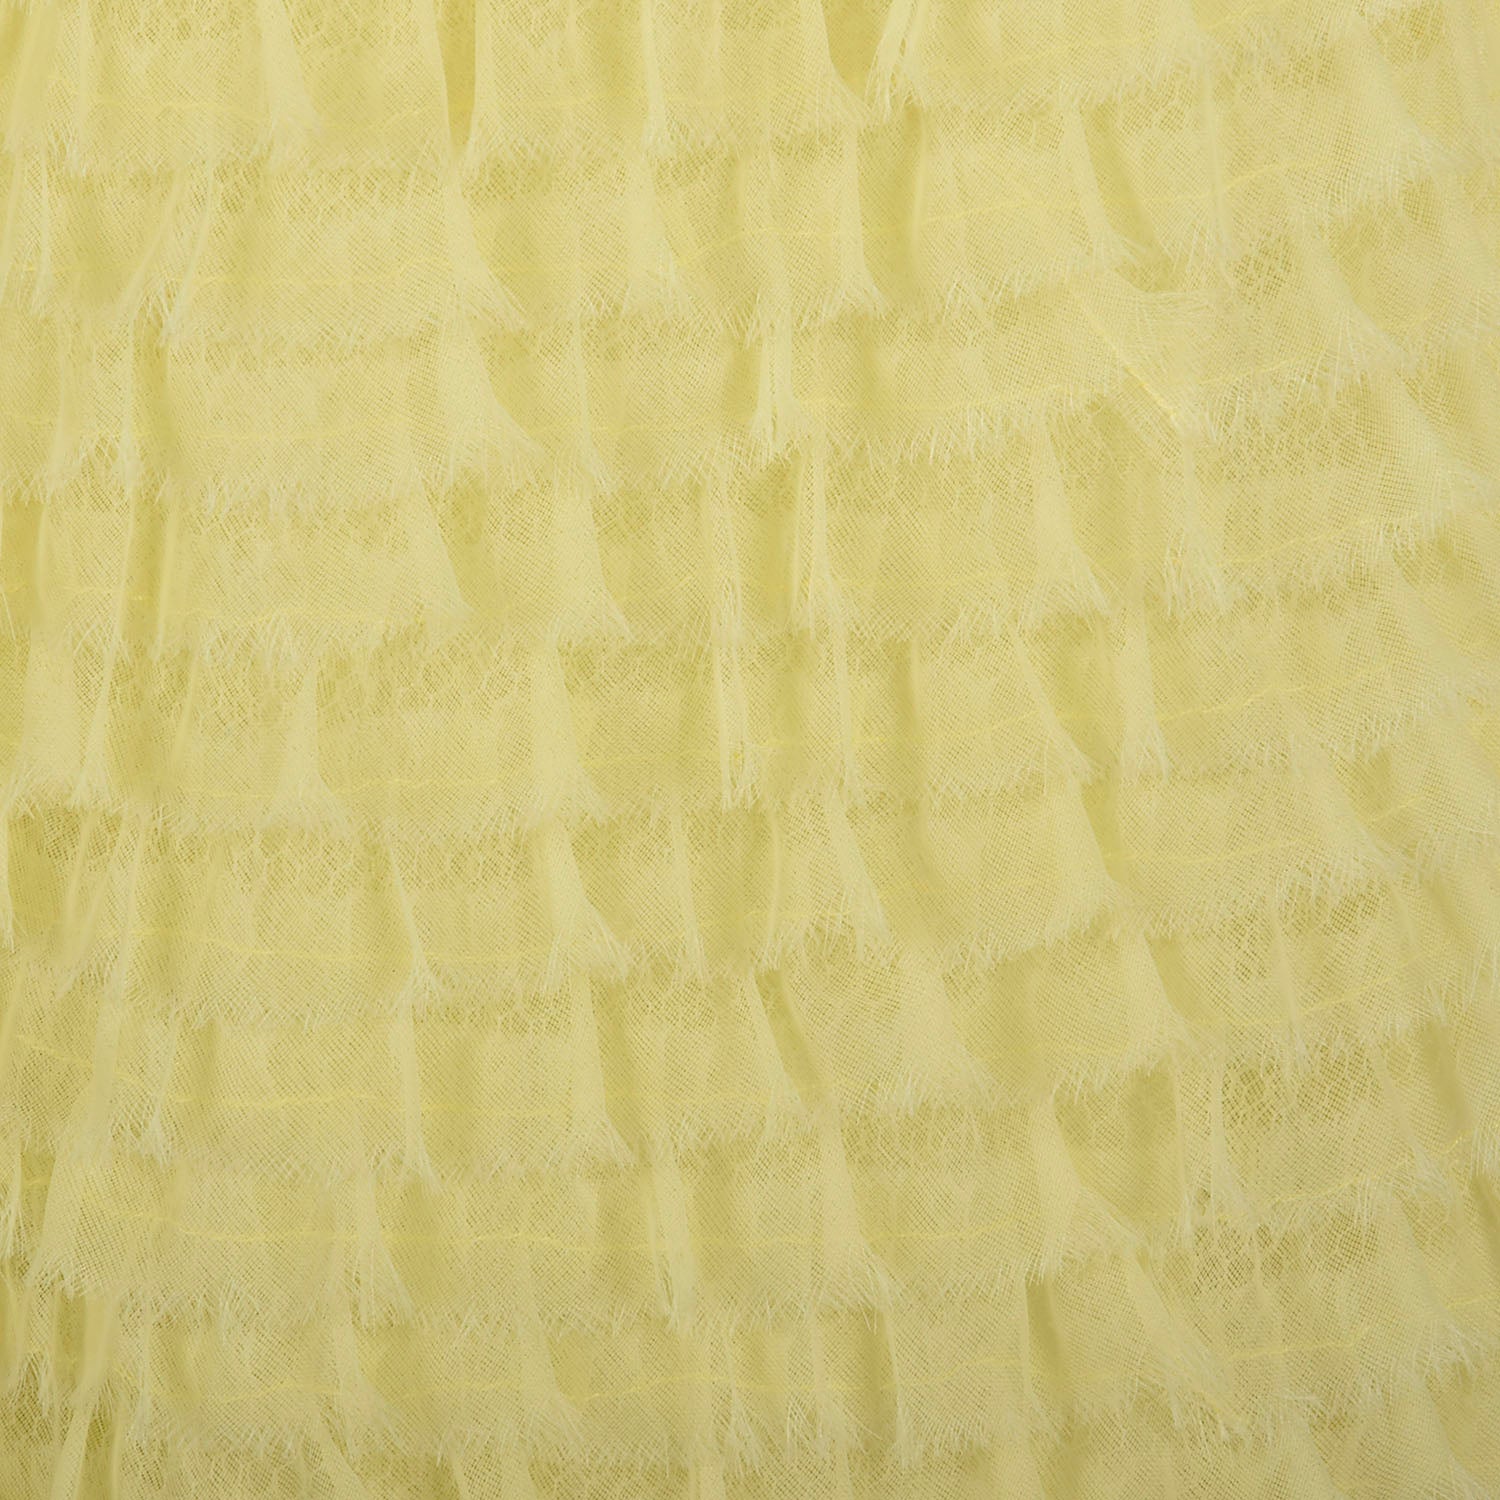 Small 1950s Creamy Yellow Formal Dress Evening Gown Full Length Layered Ruffle Wedding Prom